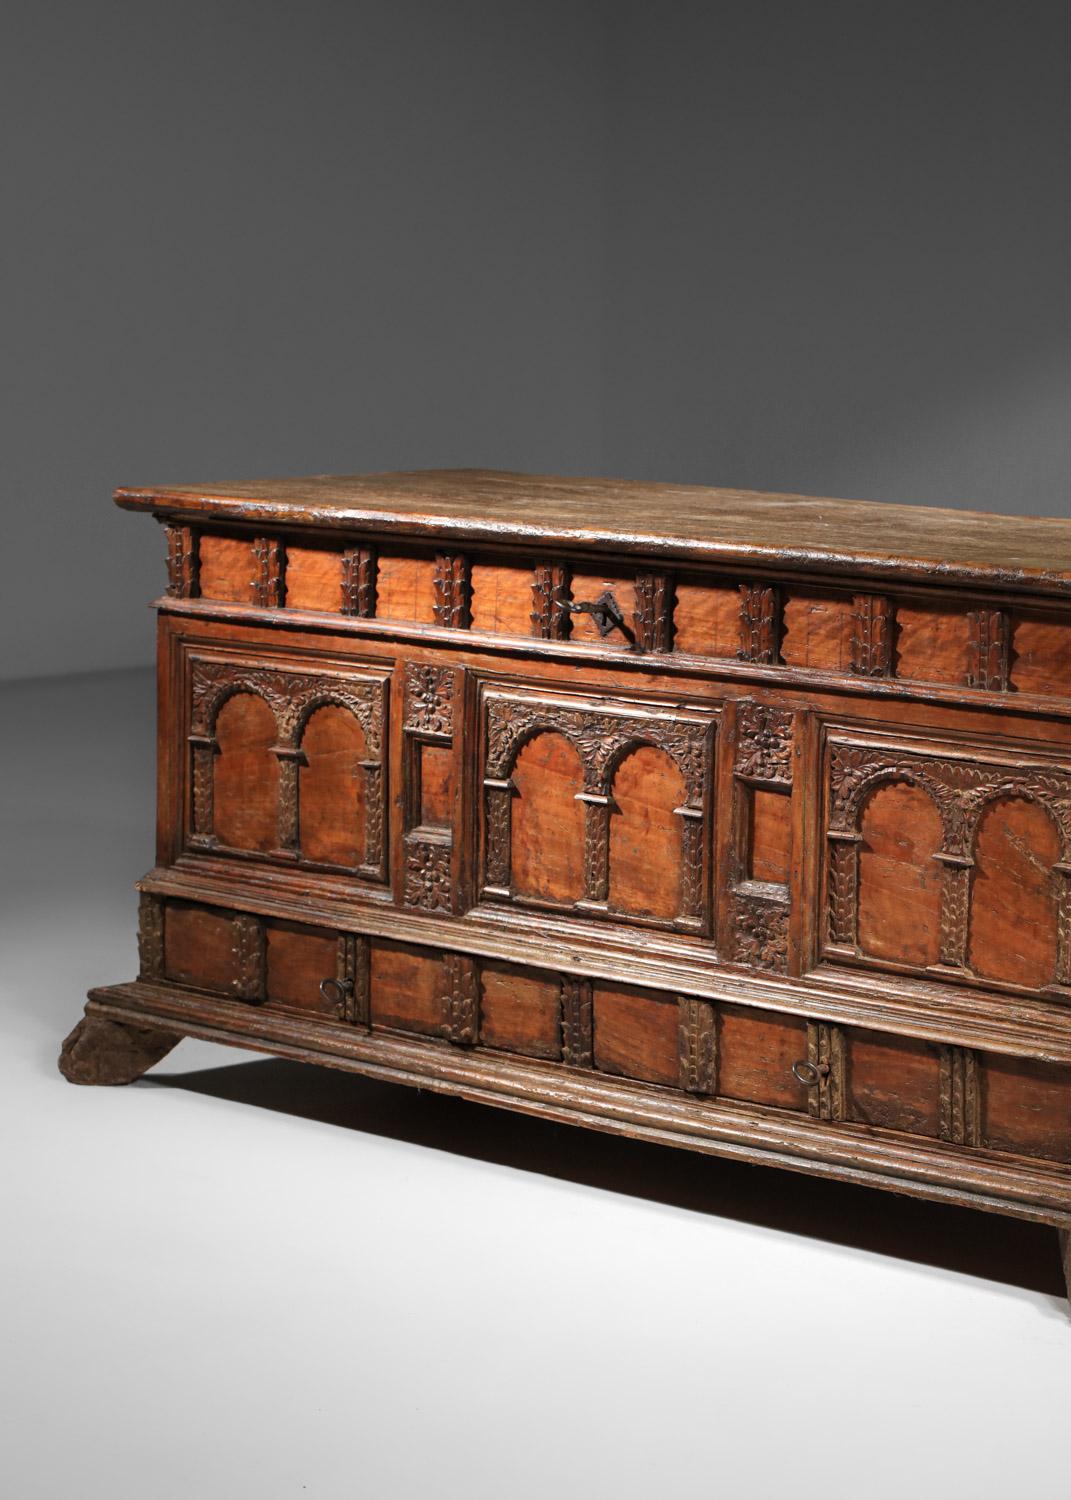 Hand-Crafted 17th century Spanish or Italian carved solid wood chest For Sale